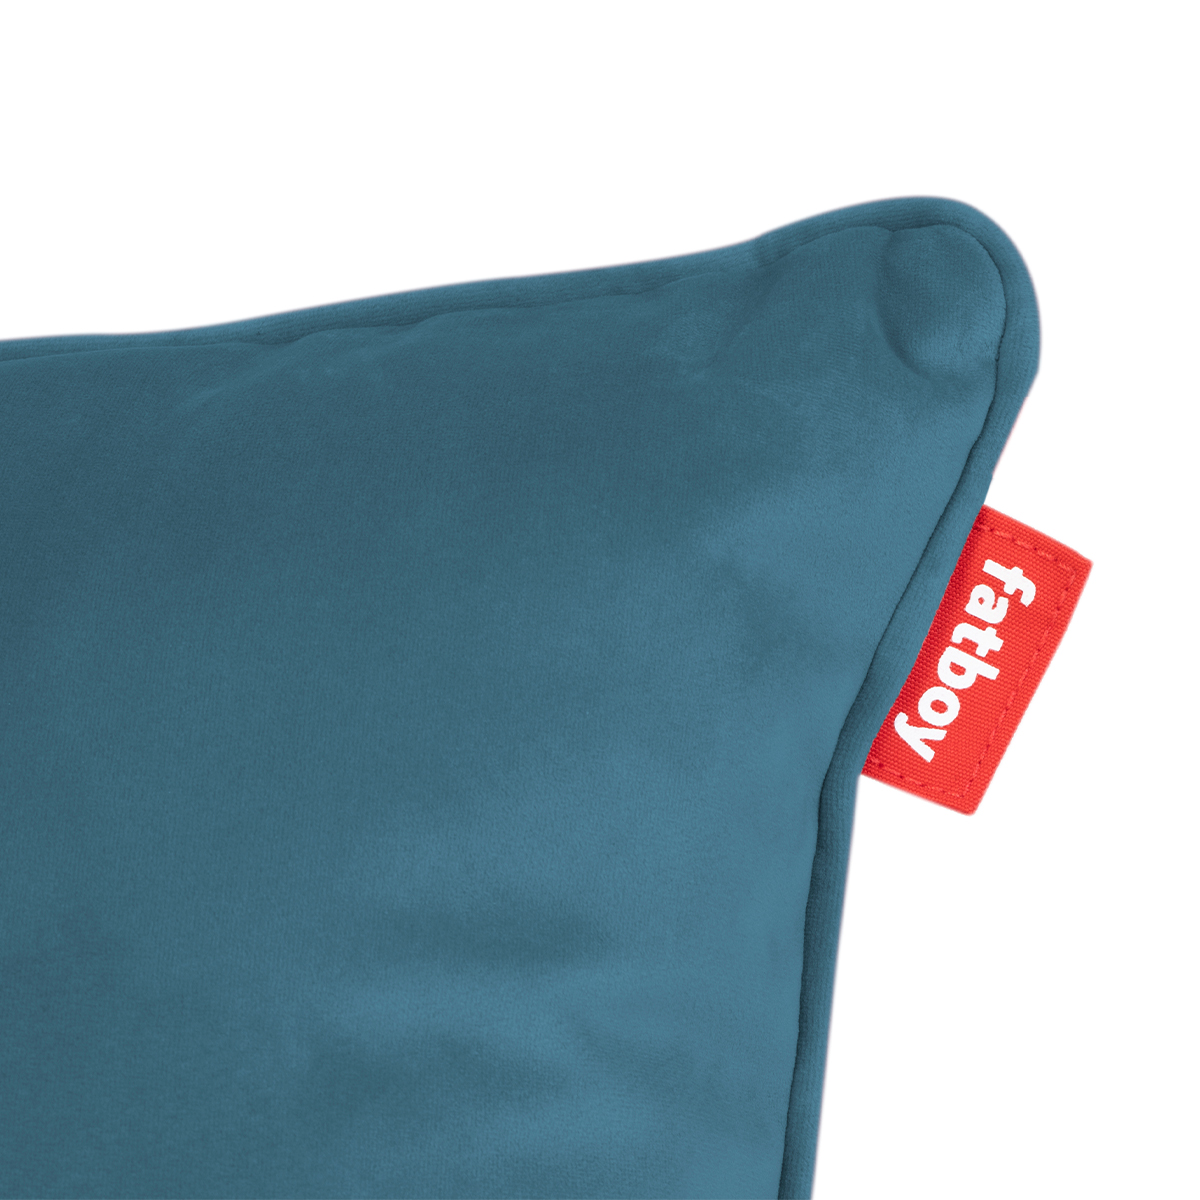 FATBOY pillow king velvet recycled cloud Close up